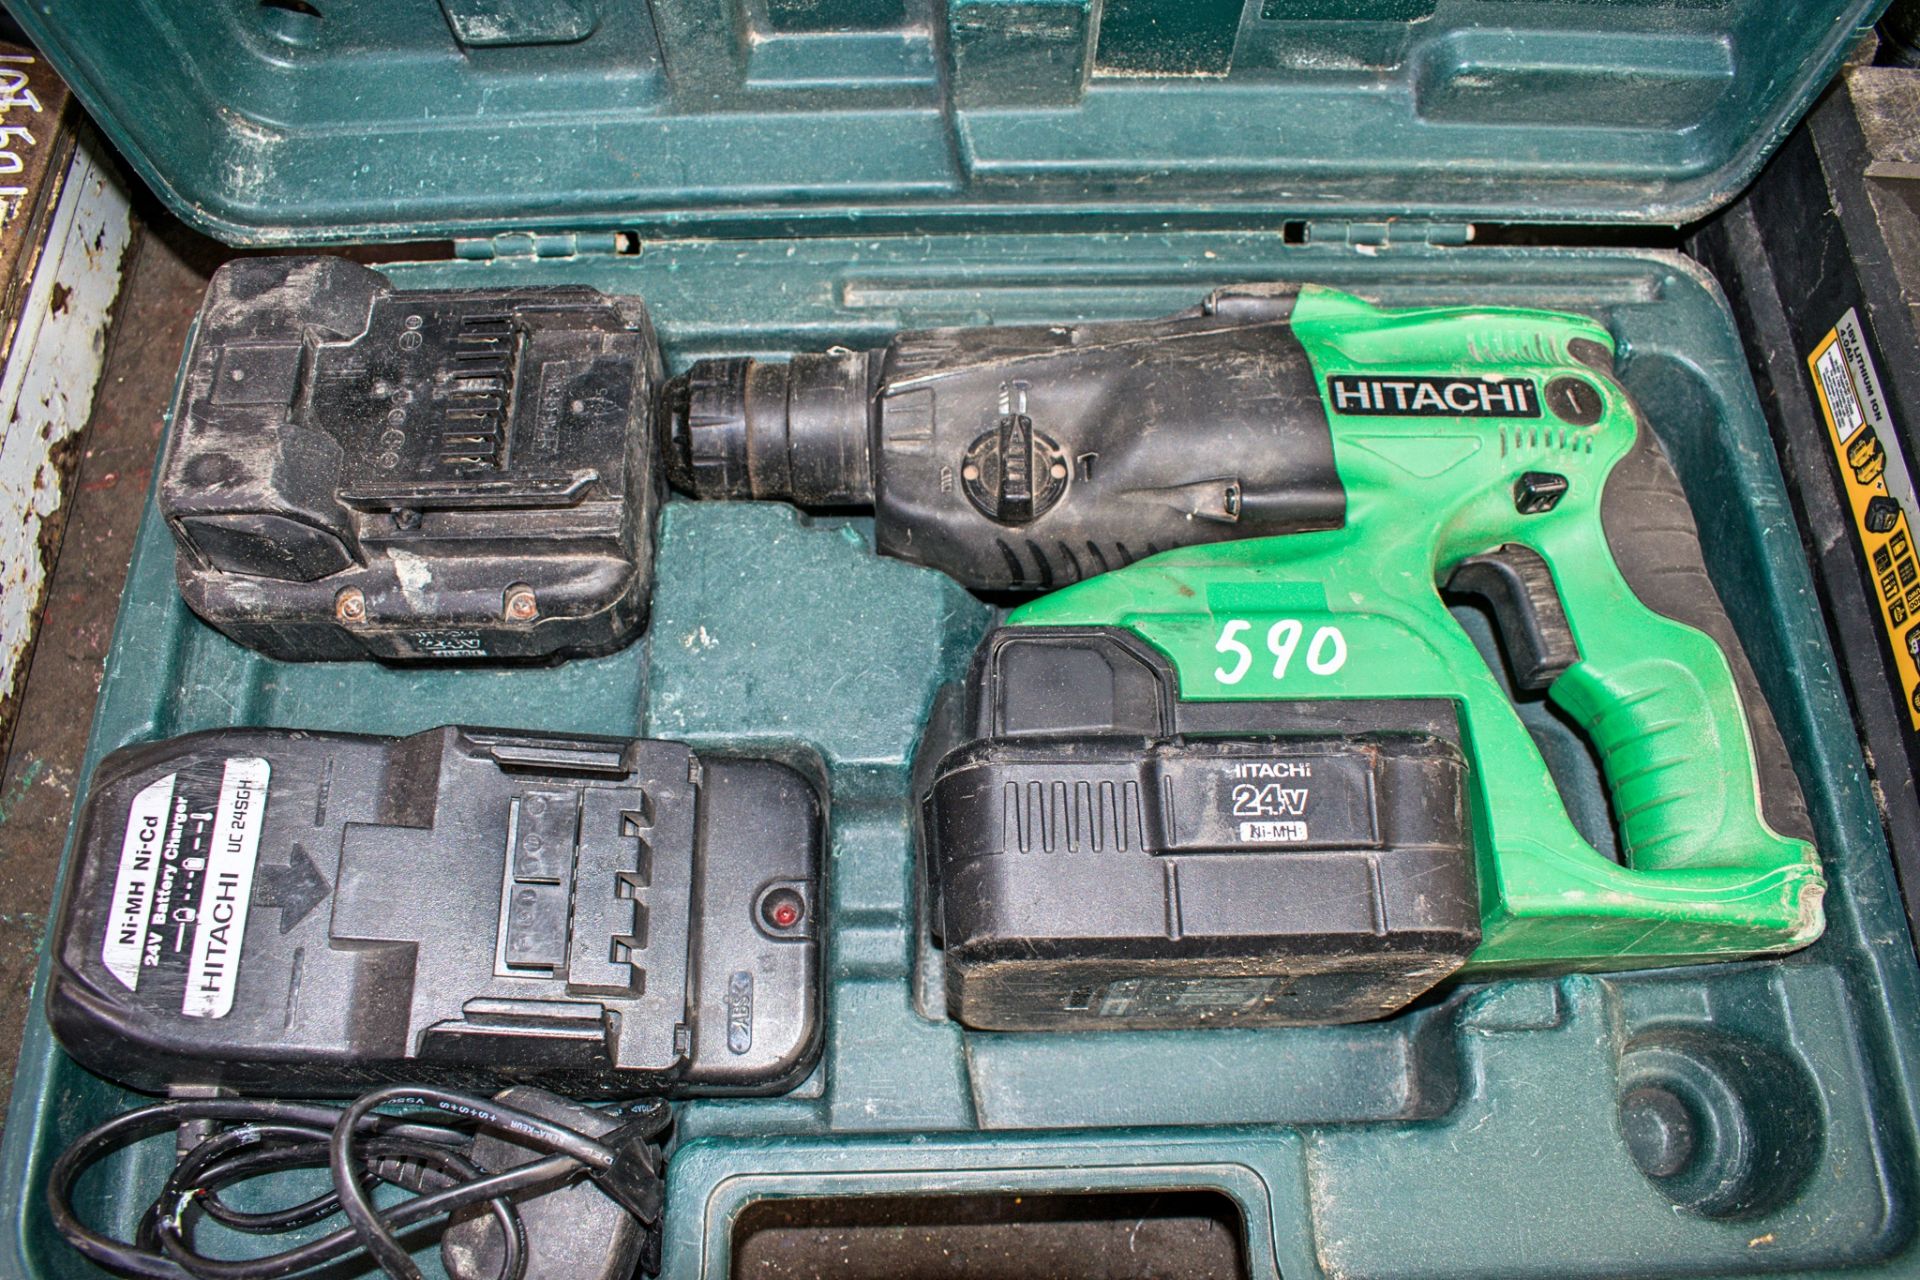 Hitachi 24v cordless SDS rotary hammer drill c/w charger, 2 batteries & carry case A619962